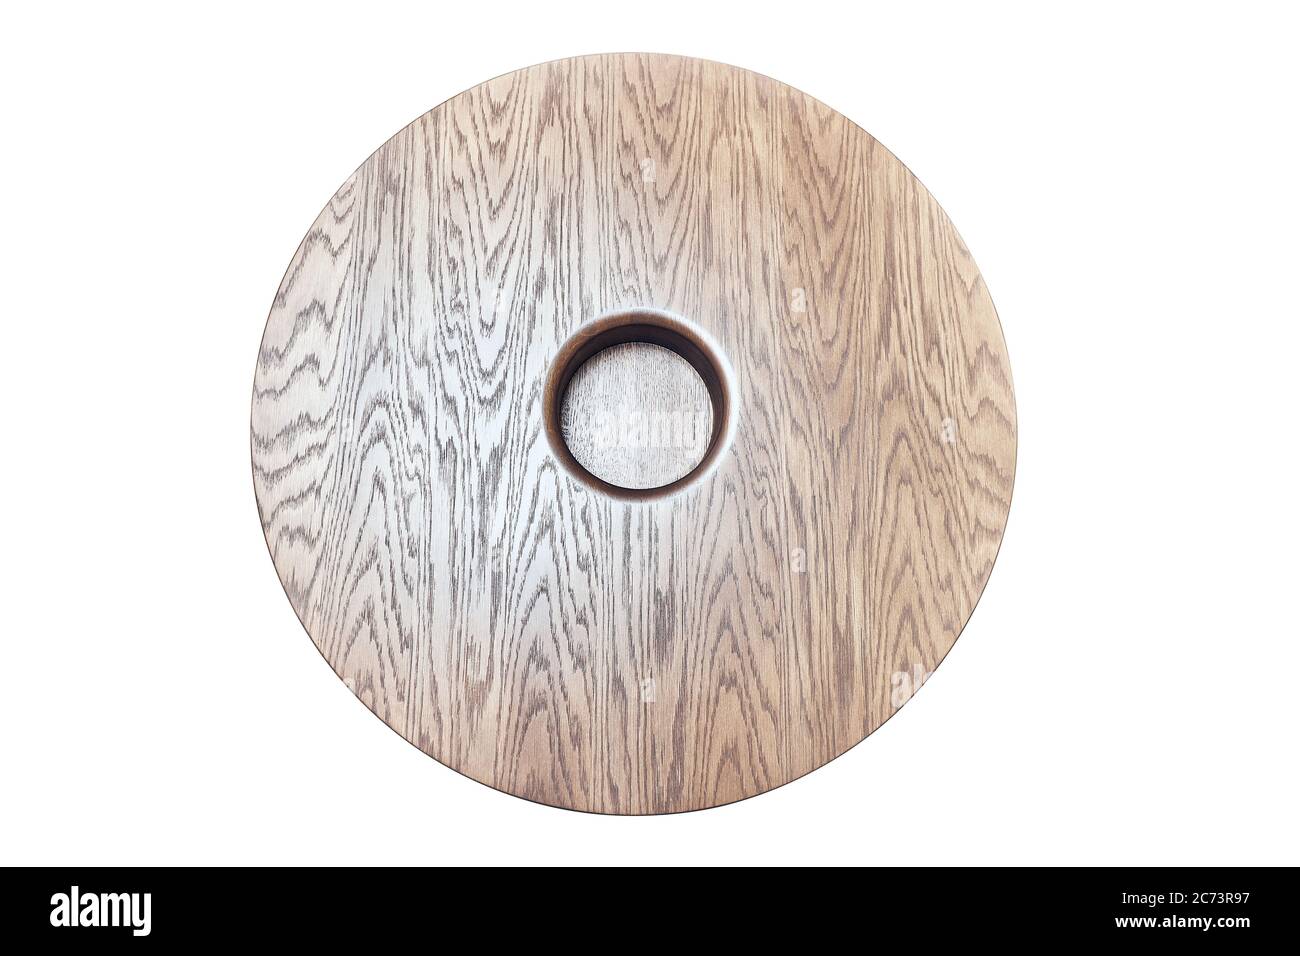 Wooden coffee table in shape of circle being on white background Stock Photo